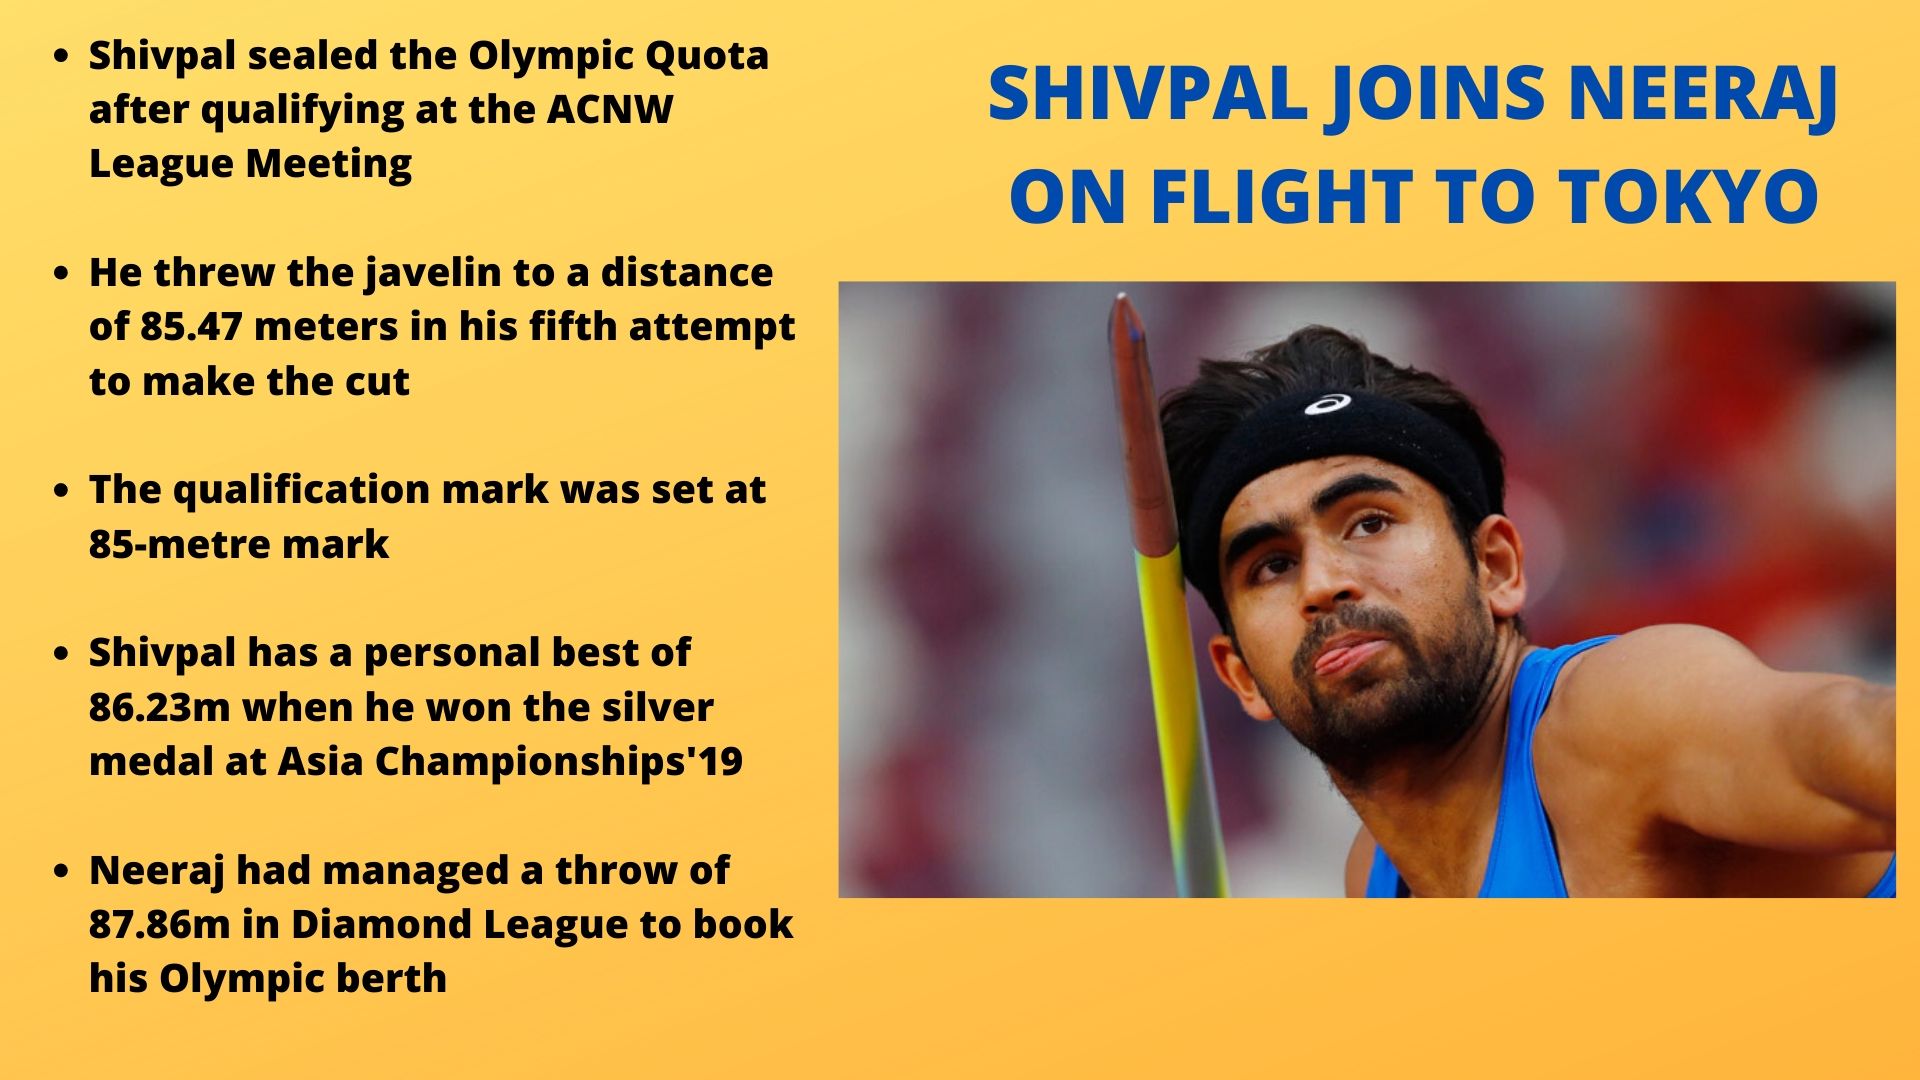 Shivpal Singh second Indian javelin thrower after Jeeraj Chopra to qualify for Tokyo Olympics.